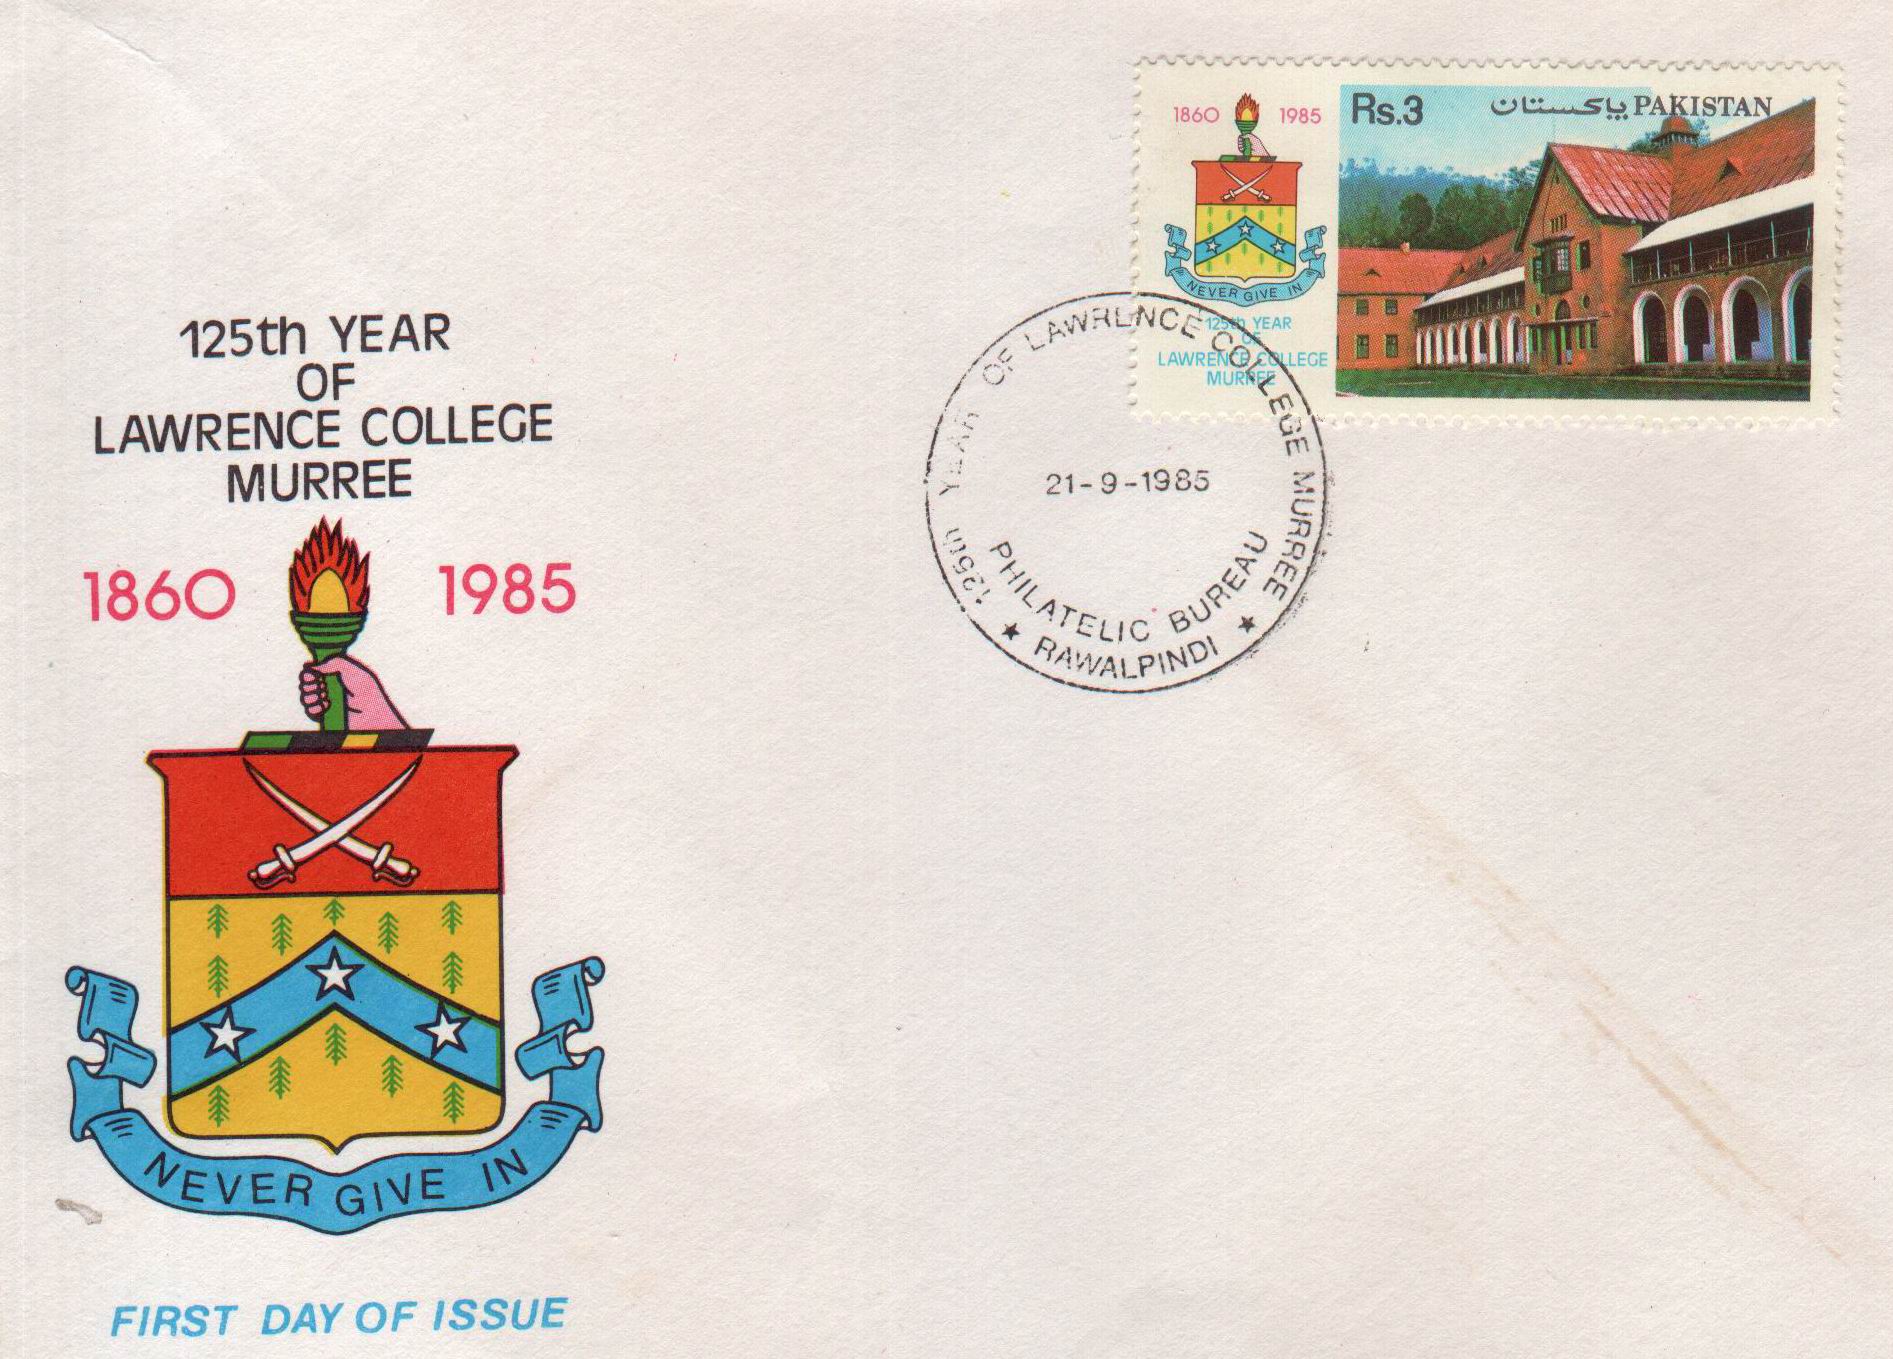 Pakistan Fdc 1985 Brochure & Stamp Lawrence College Murree - Click Image to Close